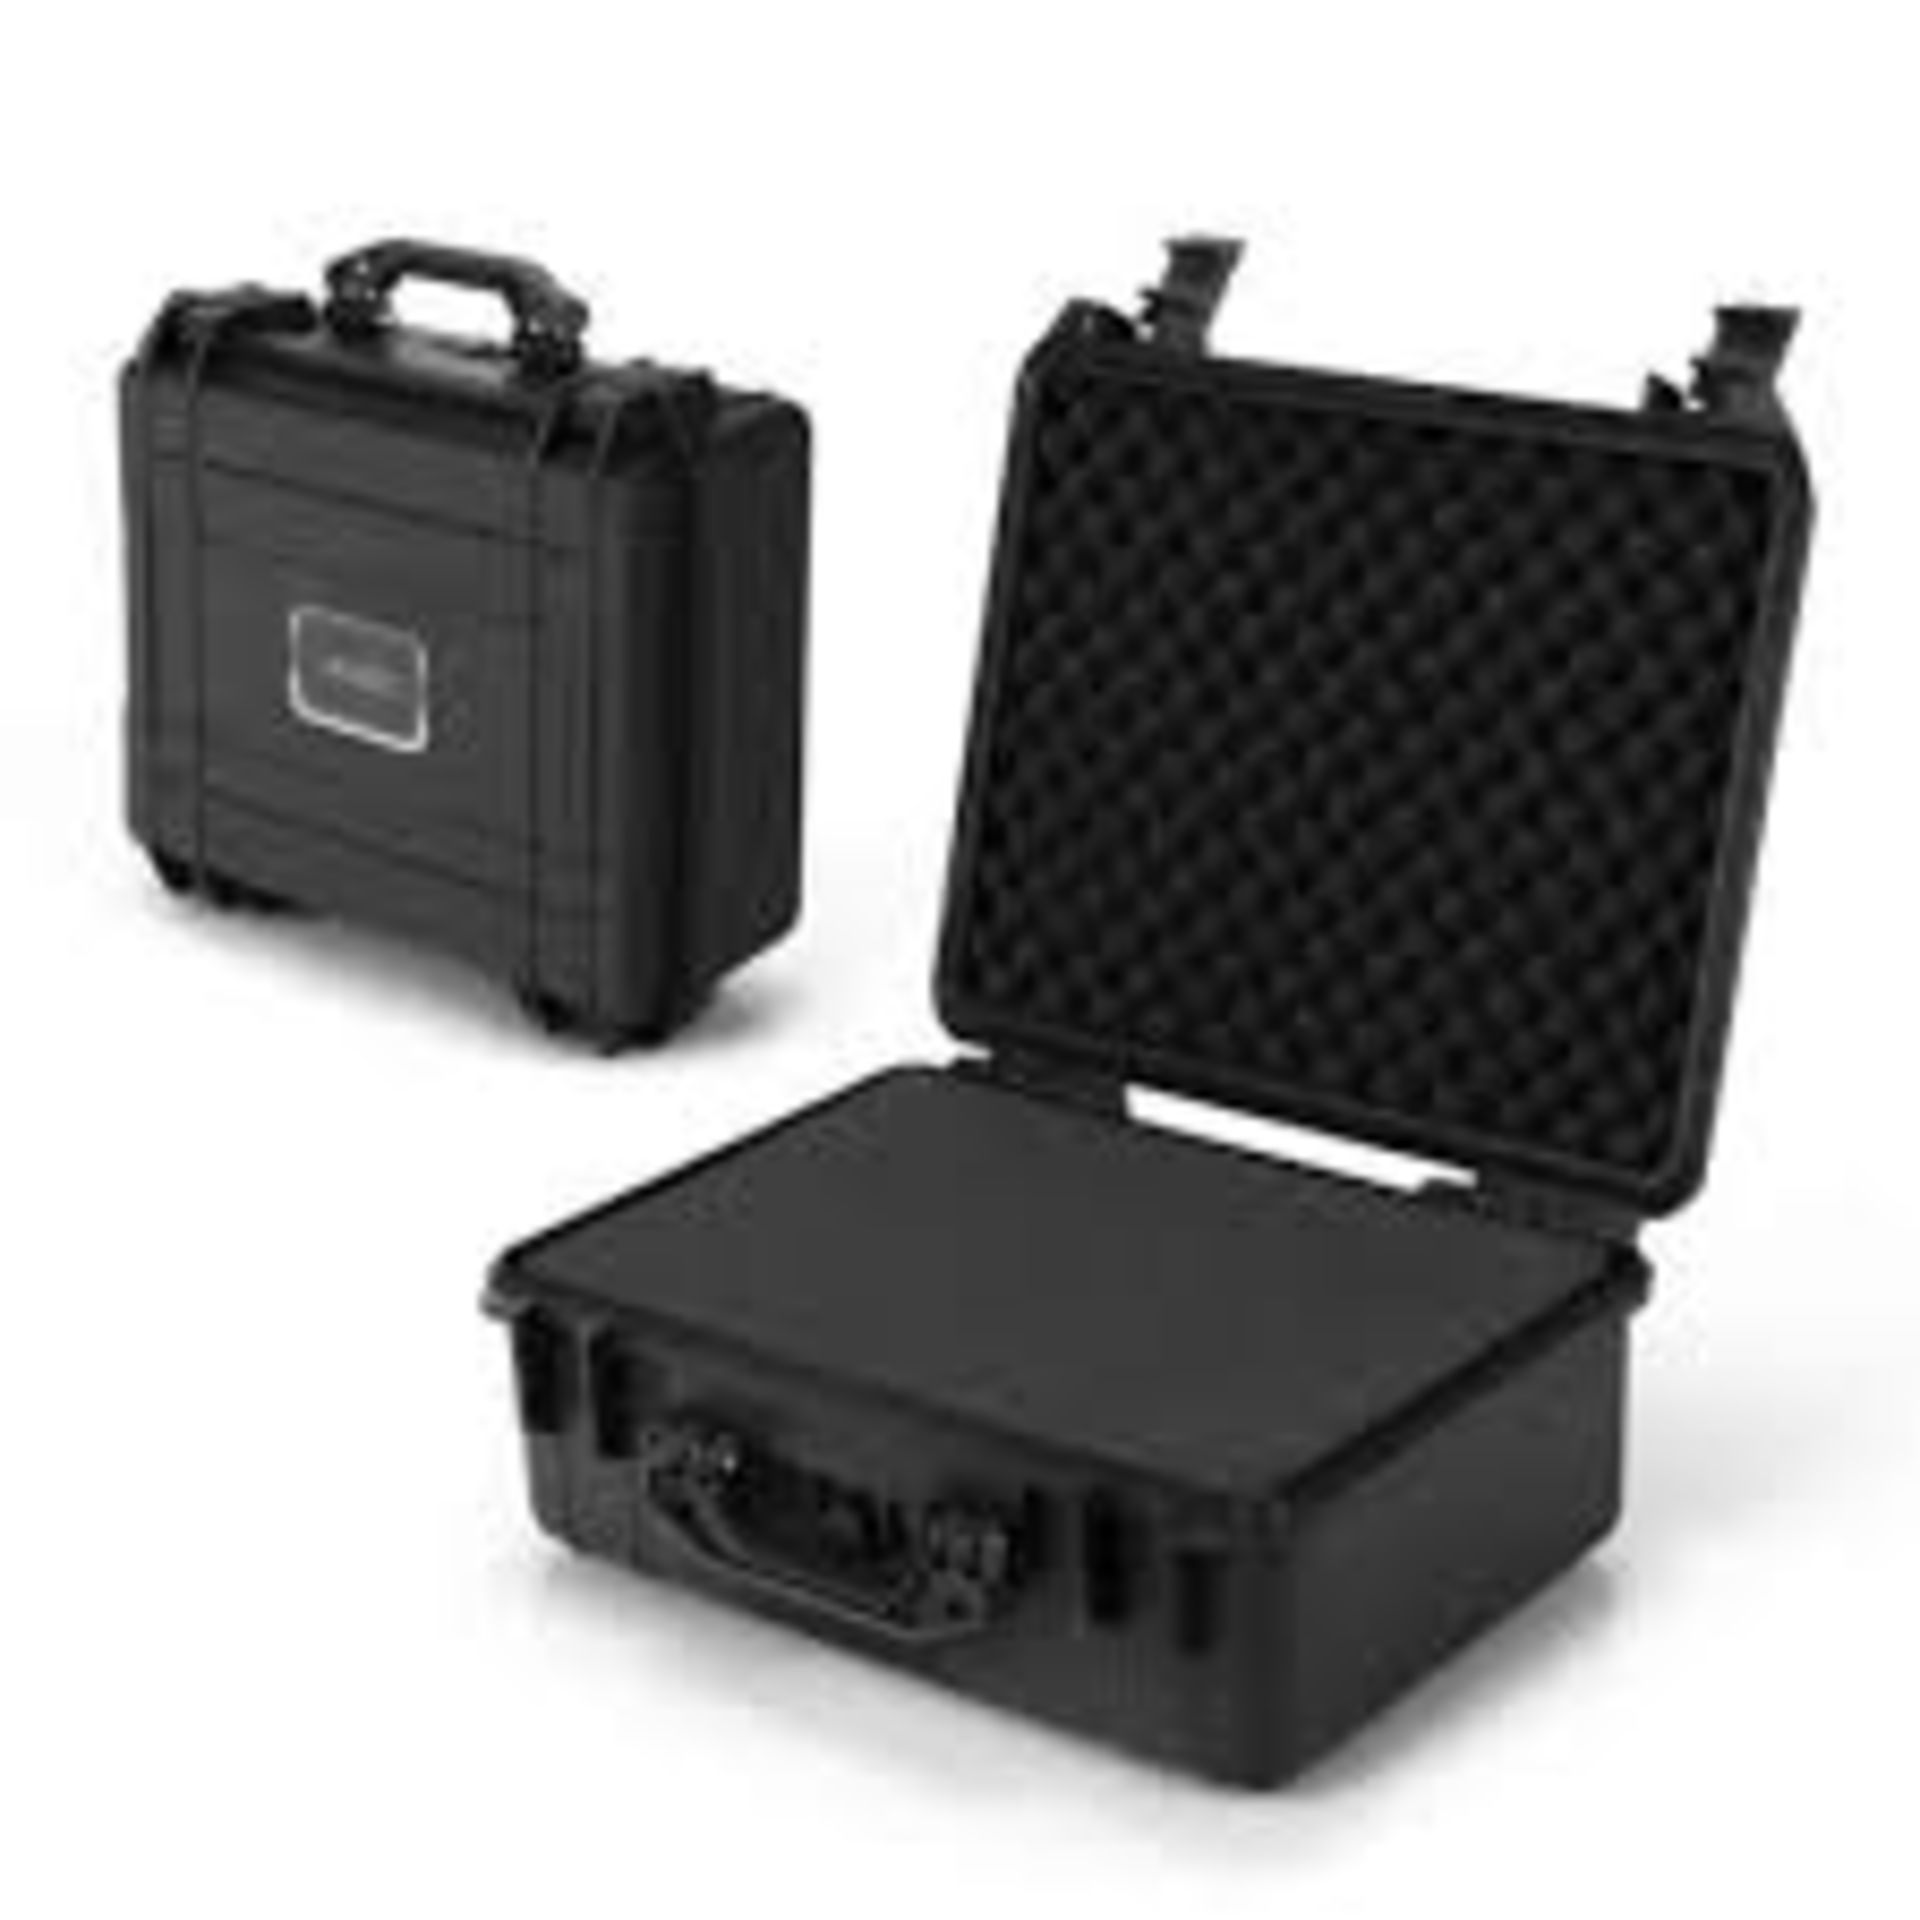 Portable Waterproof Hard Case with Customizable Fit Foam. - R13a.13.